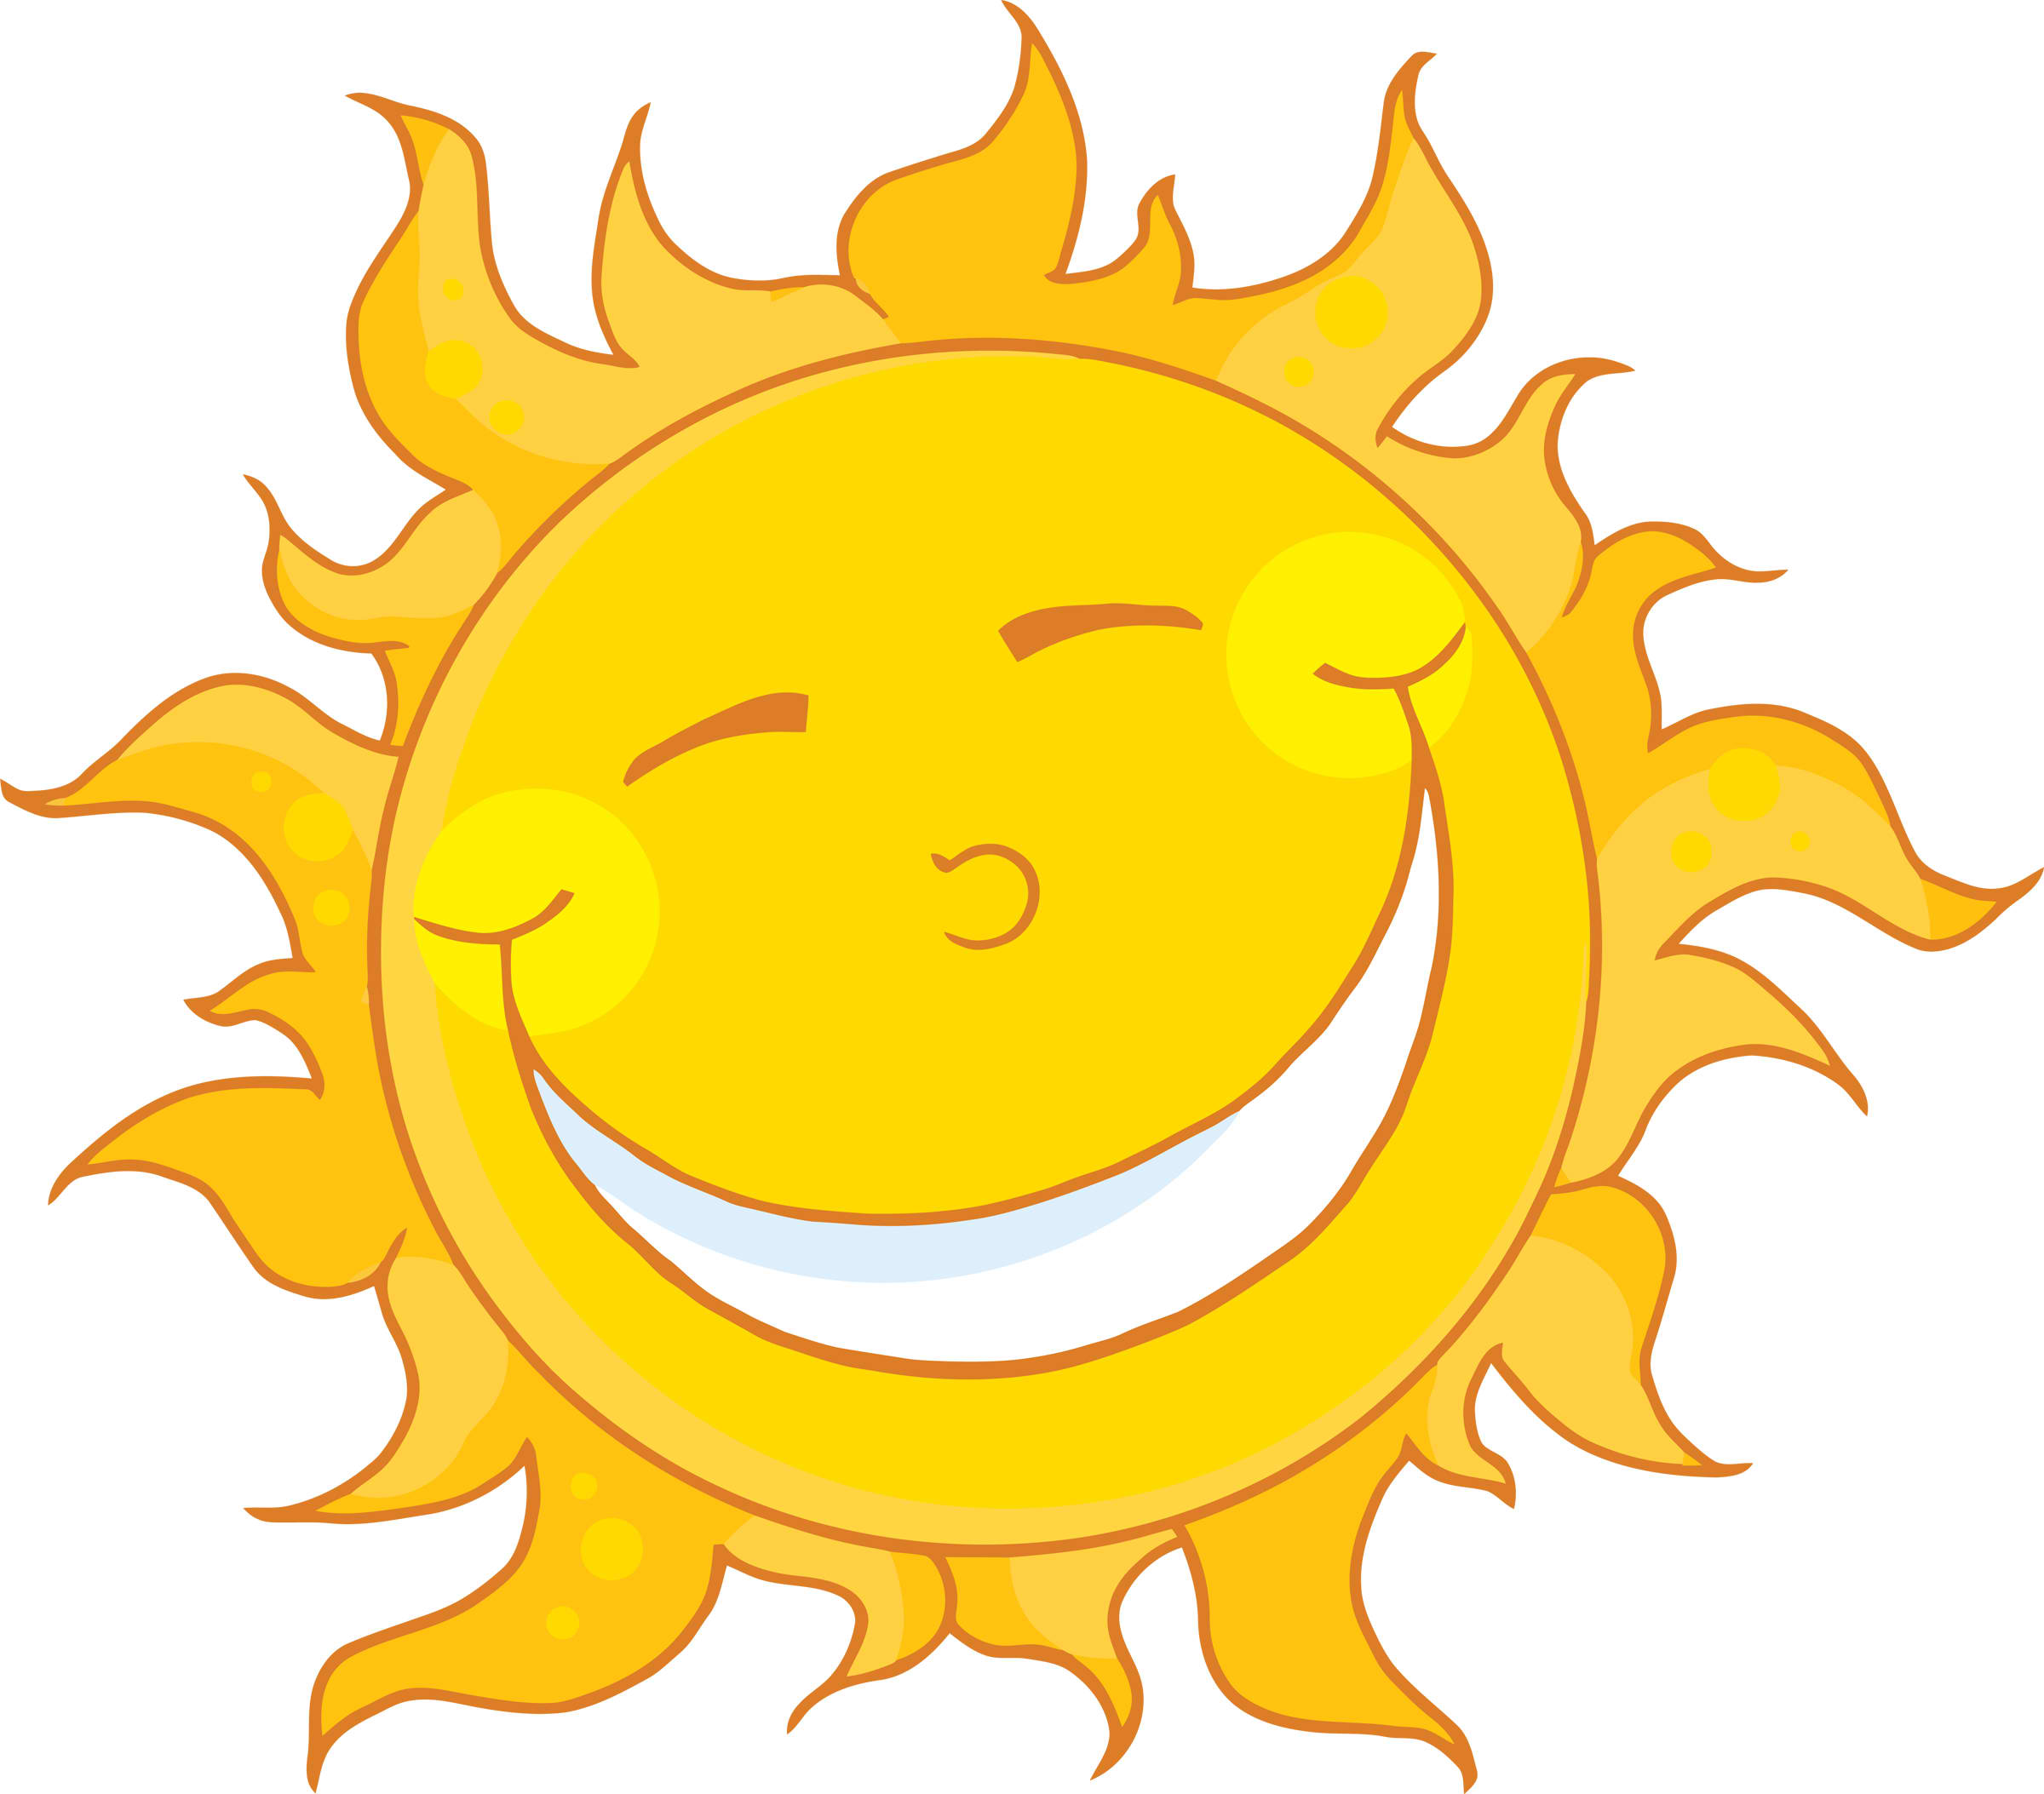 Free Cartoon Pictures Of The Sun, Download Free Cartoon Pictures Of The